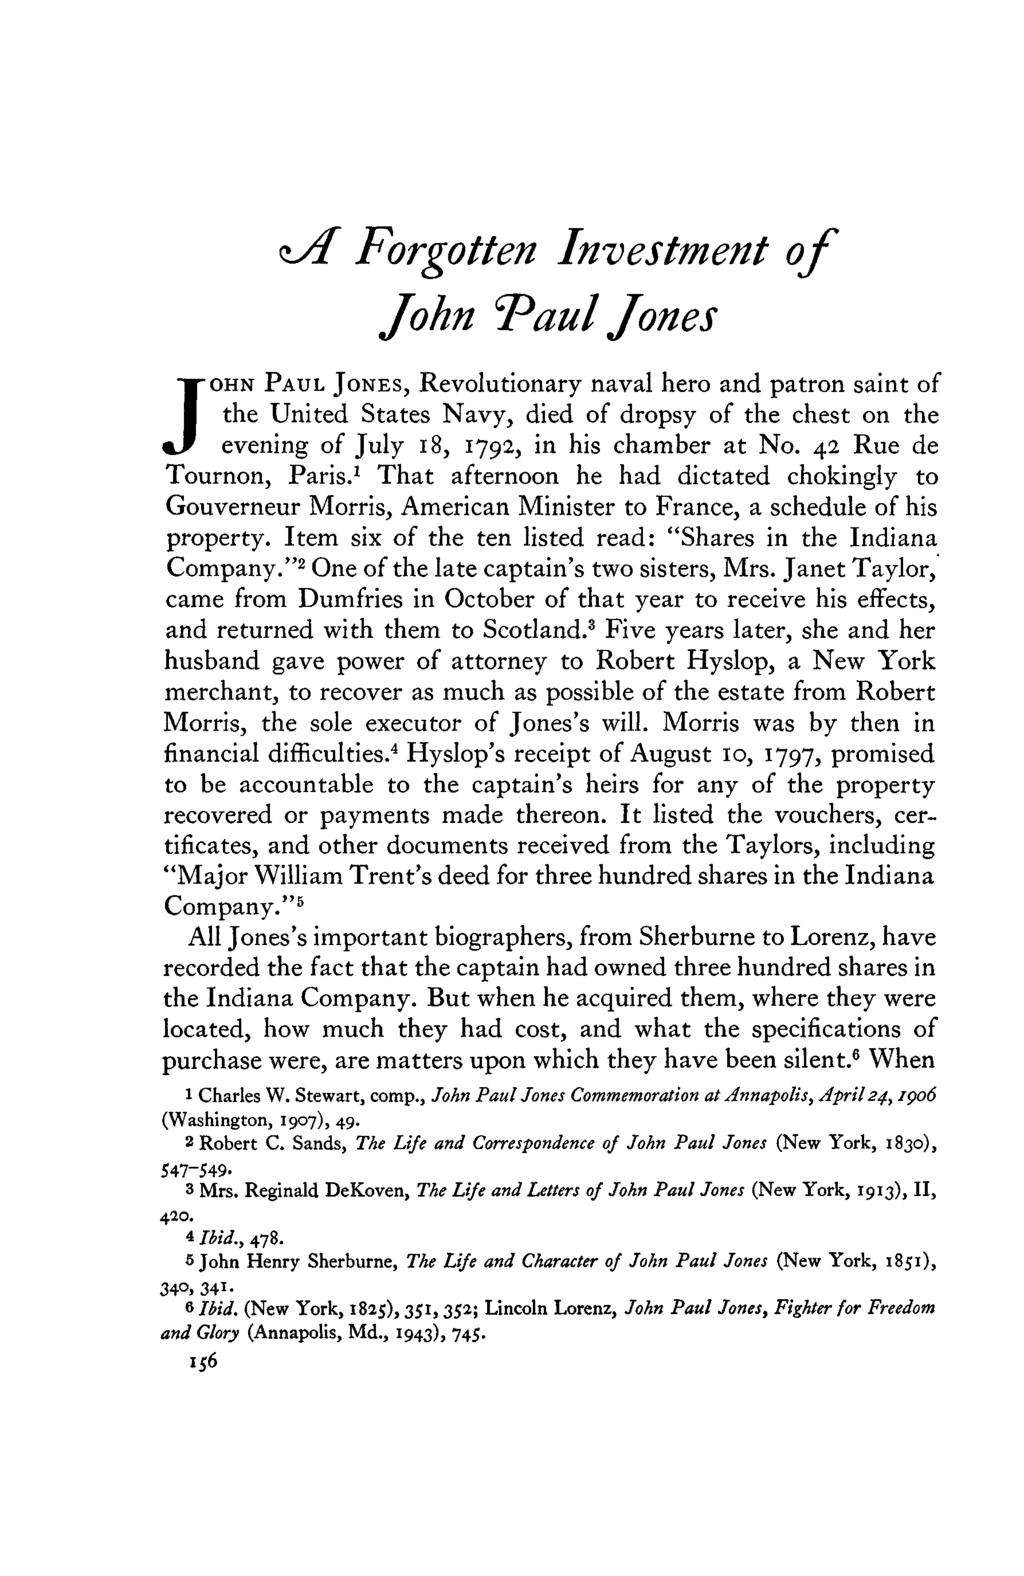 <*J1 Forgotten Investment of John 'Paul Jones JOHN PAUL JONES, Revolutionary naval hero and patron saint of the United States Navy, died of dropsy of the chest on the evening of July 18, 1792, in his